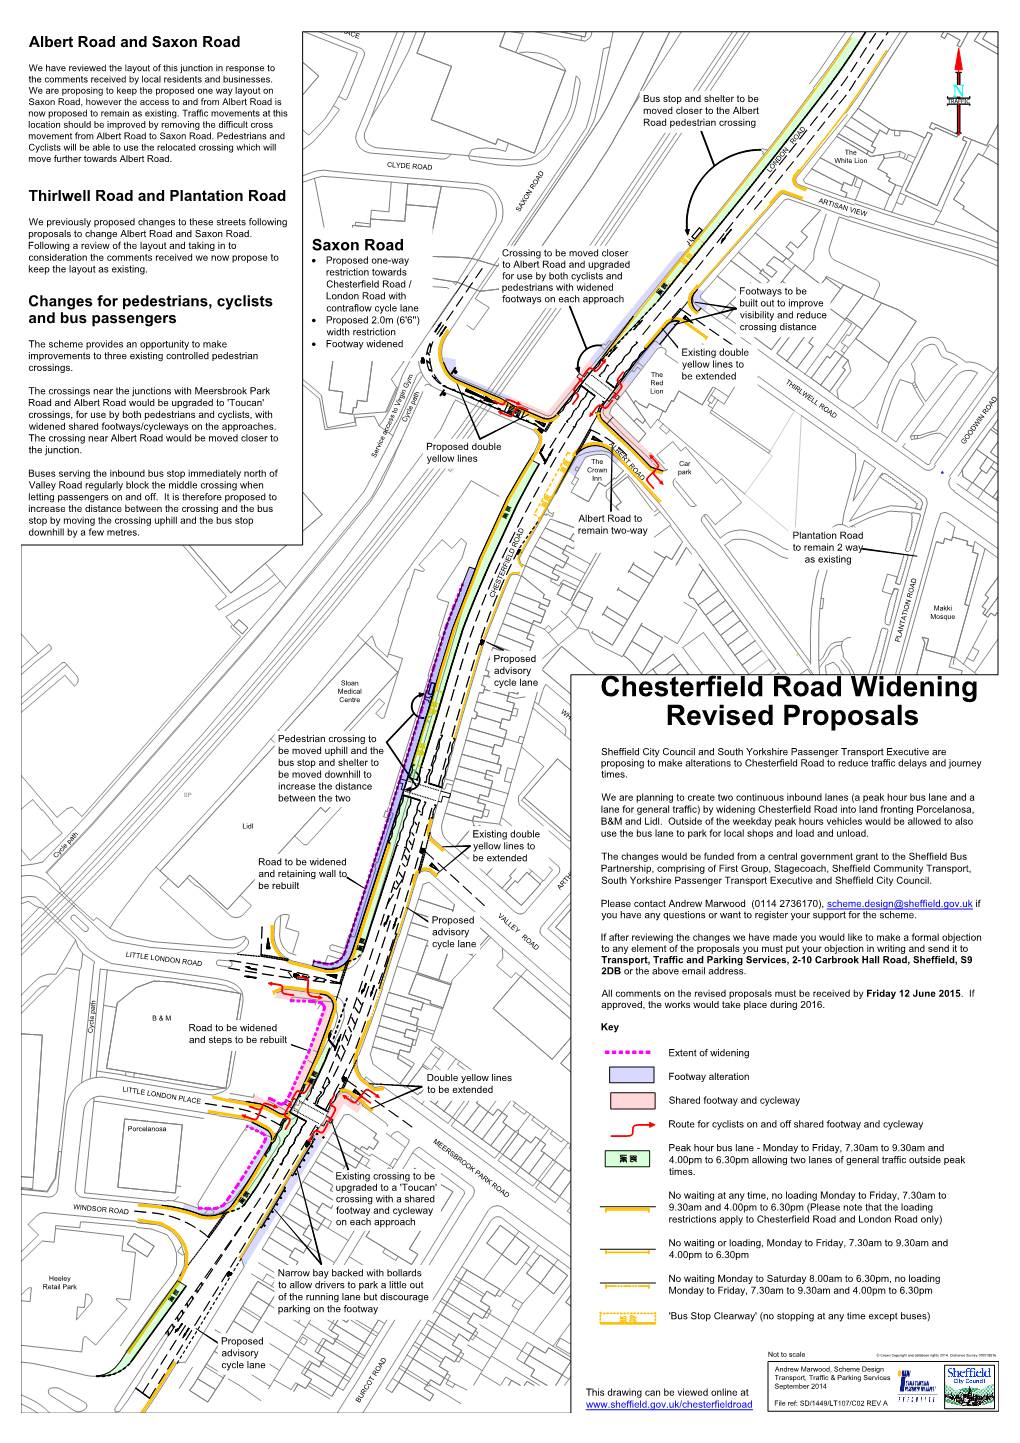 Chesterfield Road Widening Revised Proposals